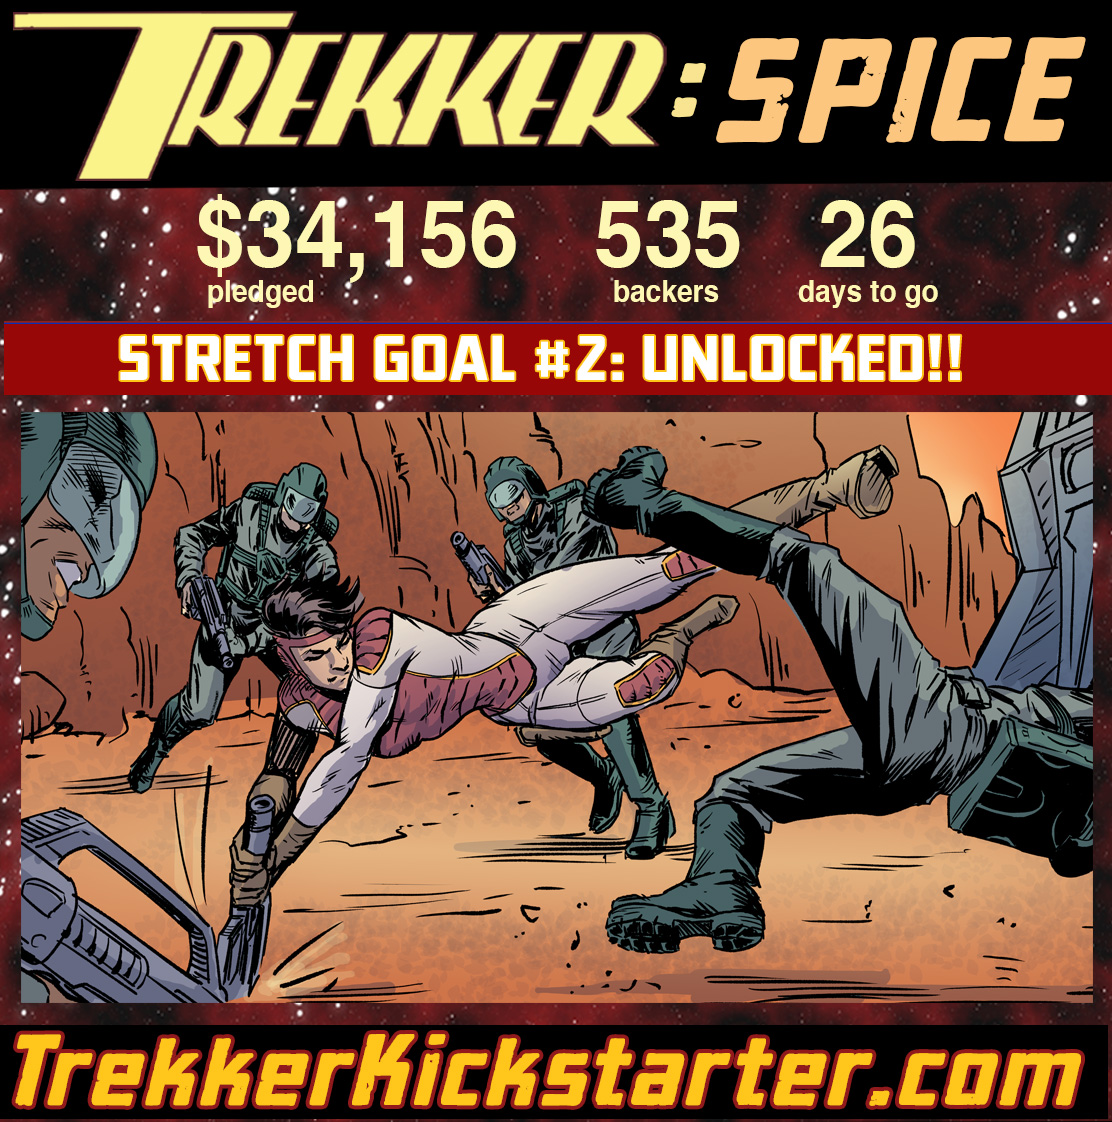 BAM! Our second big Stretch Goal kicked wide open. Bonus Content &Cover Spot Gloss added! Next: Inside Covers Art . You keep the pledges coming, I'll keep rolling out the stretch rewards. Sound fair? Then bounce over to TrekkerKickstarter.com and keep the spice flowing.